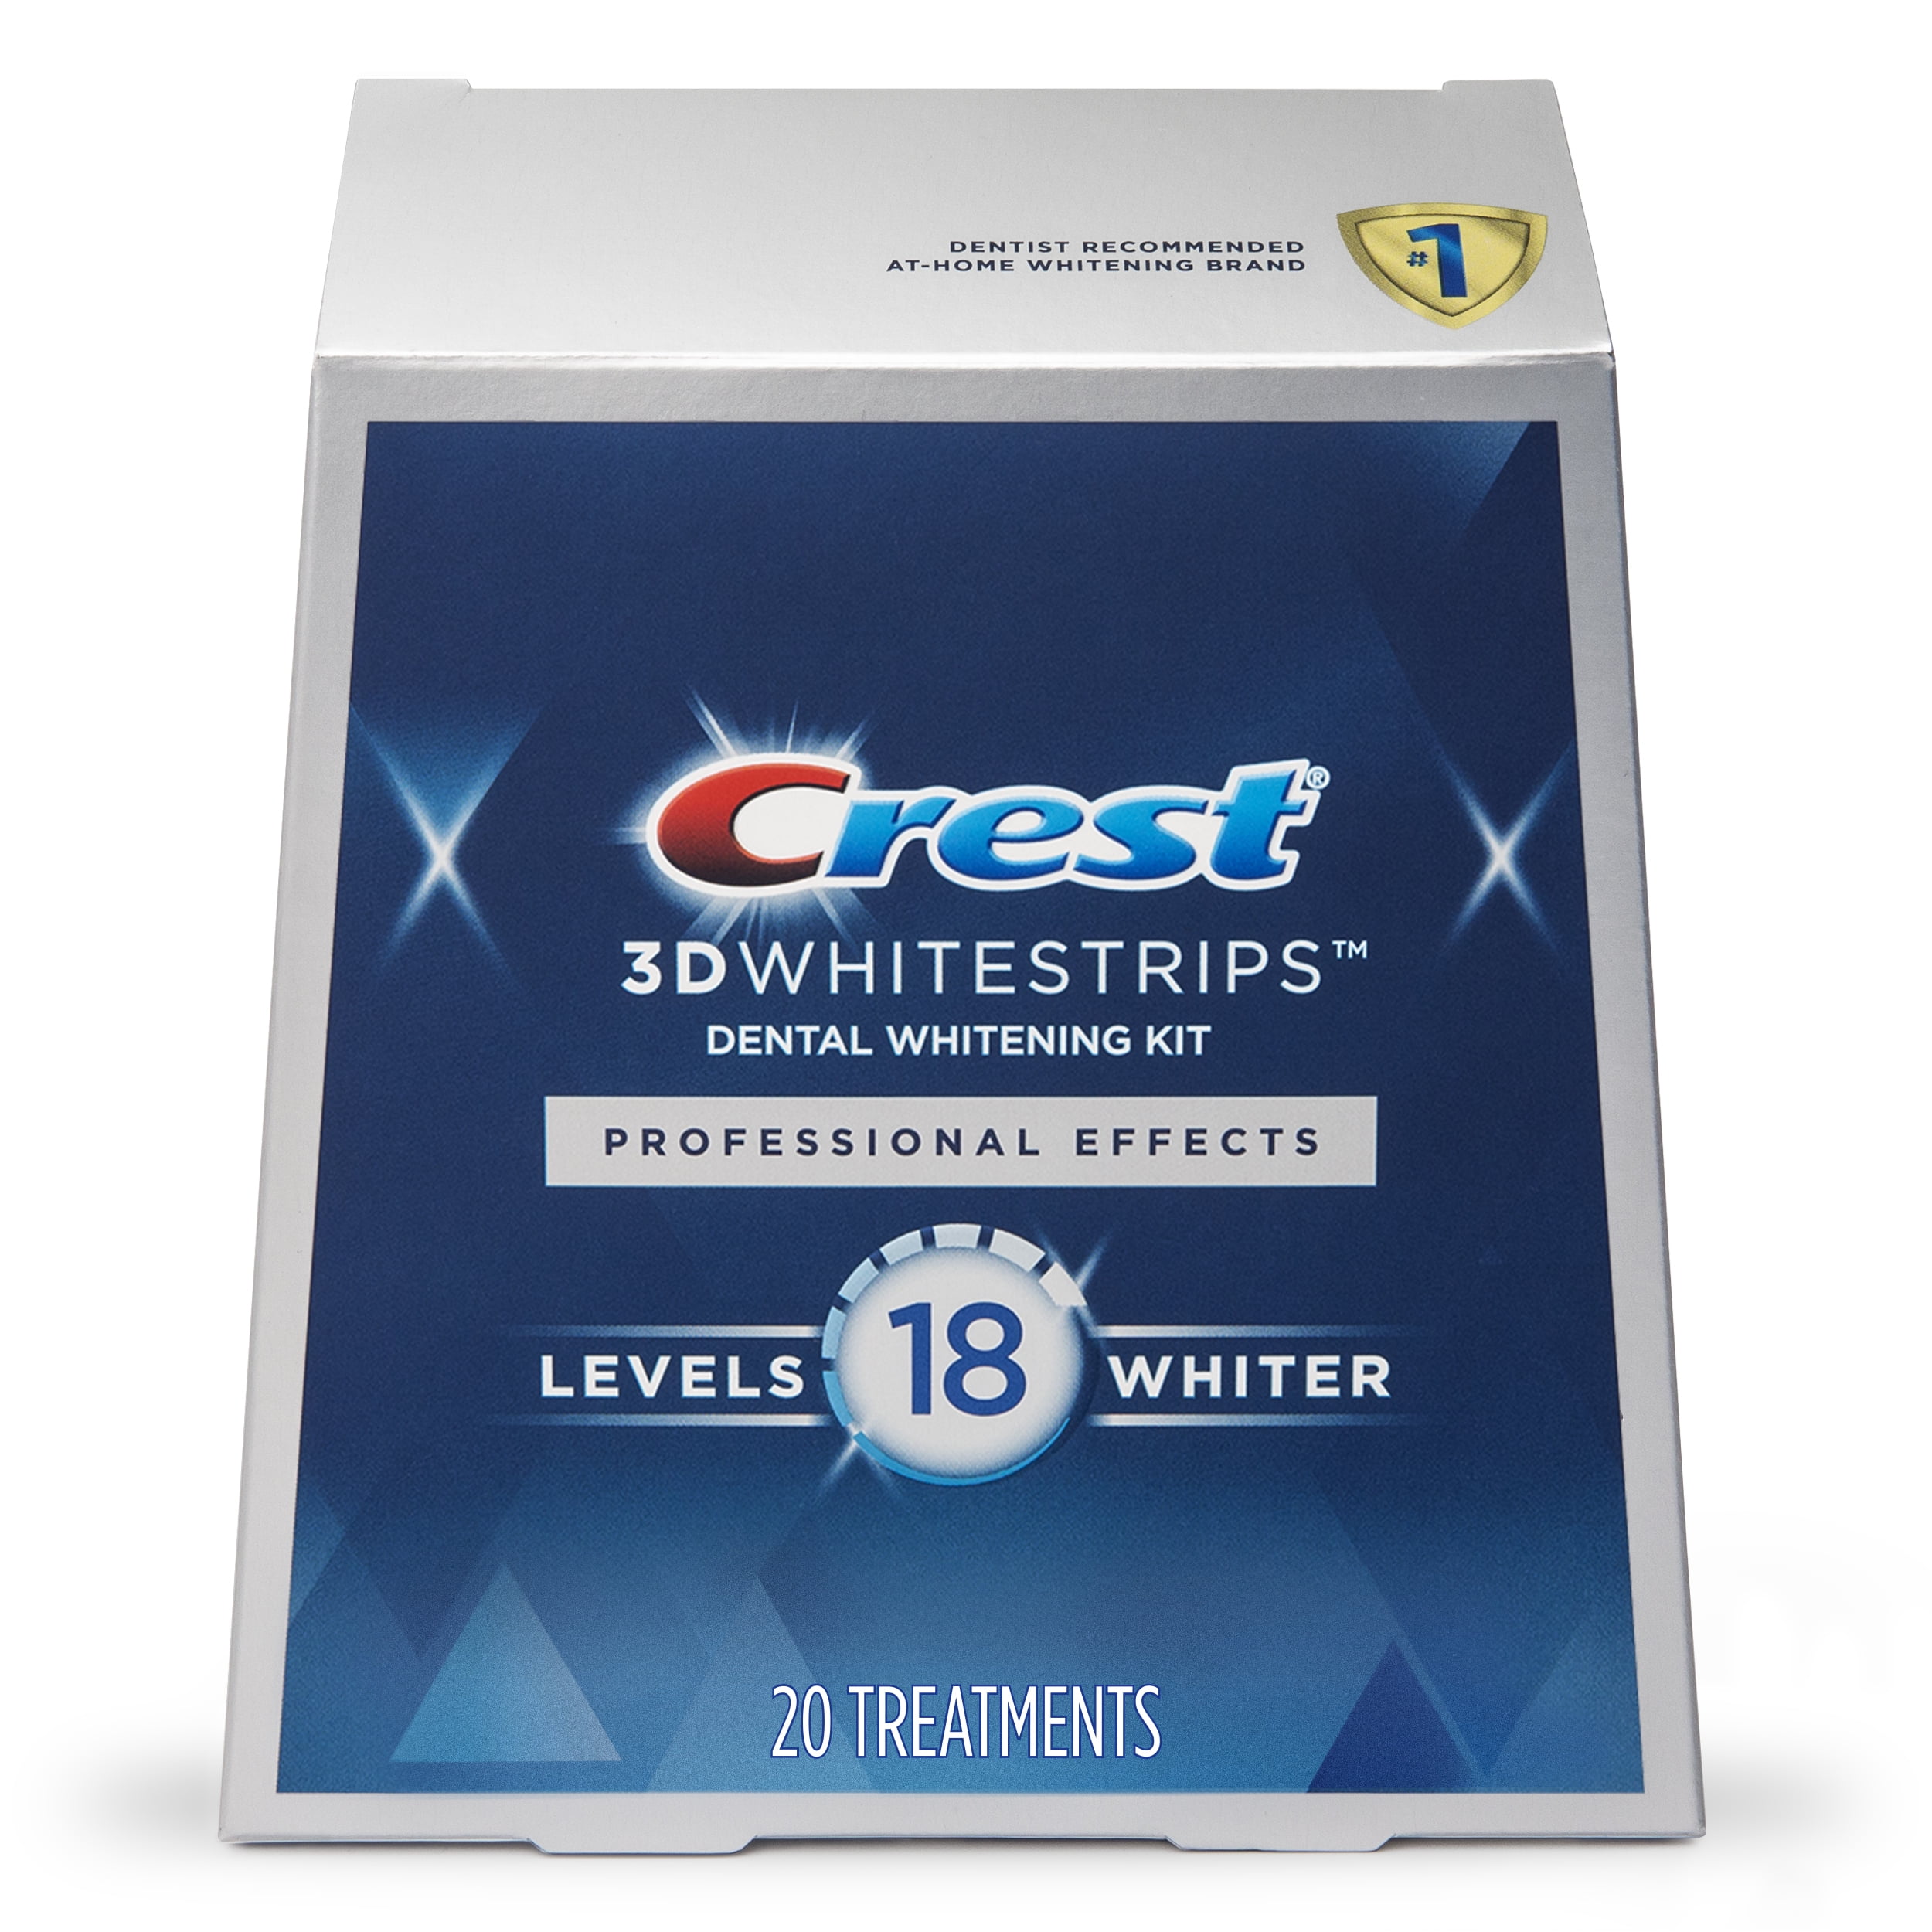 Crest 3D Whitestrips Professional Effects At-home Teeth Whitening Kit, 20 Treatments